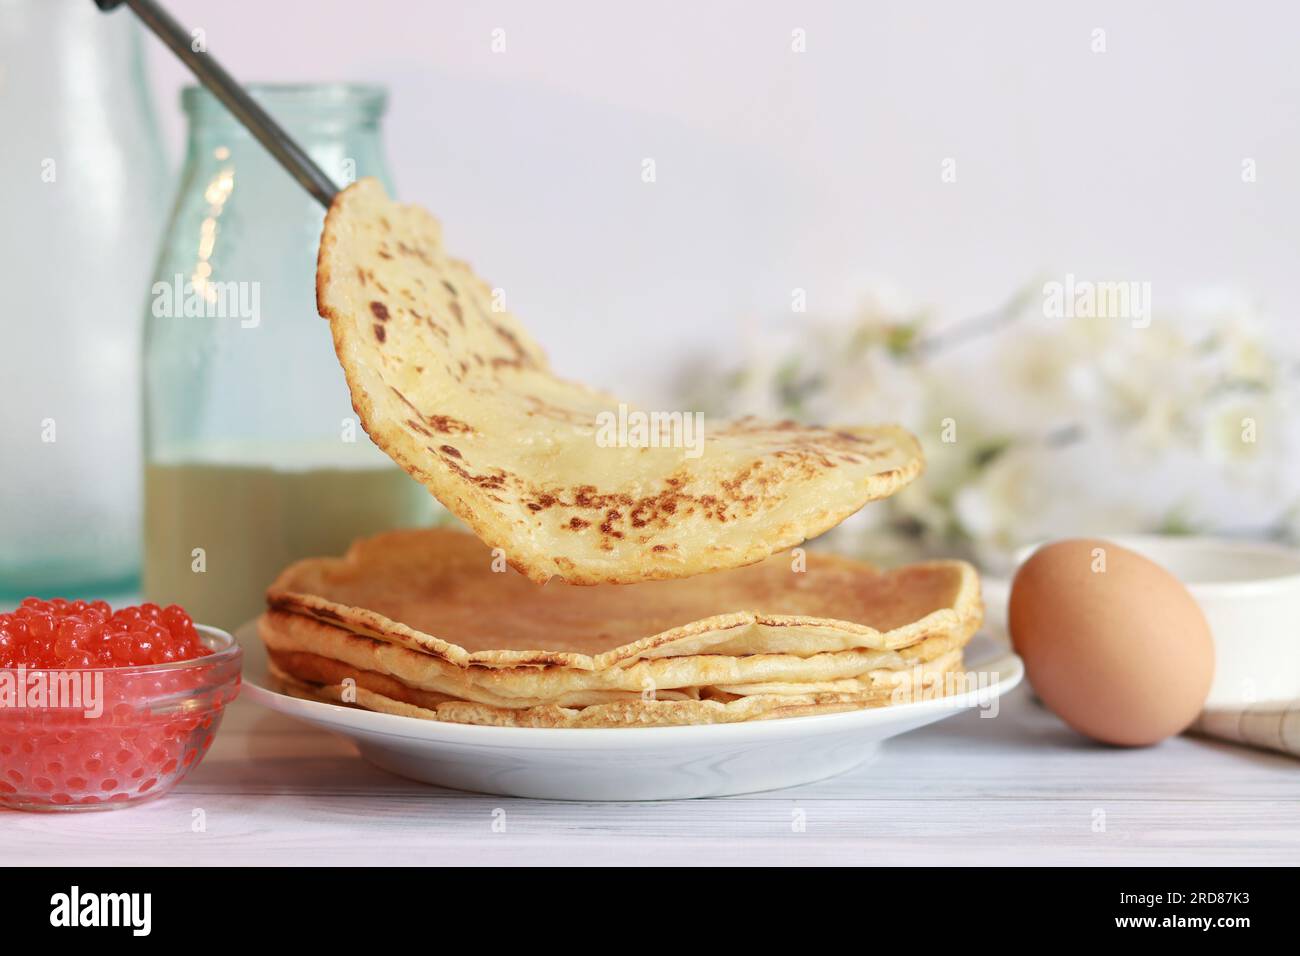 Ready made images - hi-res photography Alamy and pancakes stock